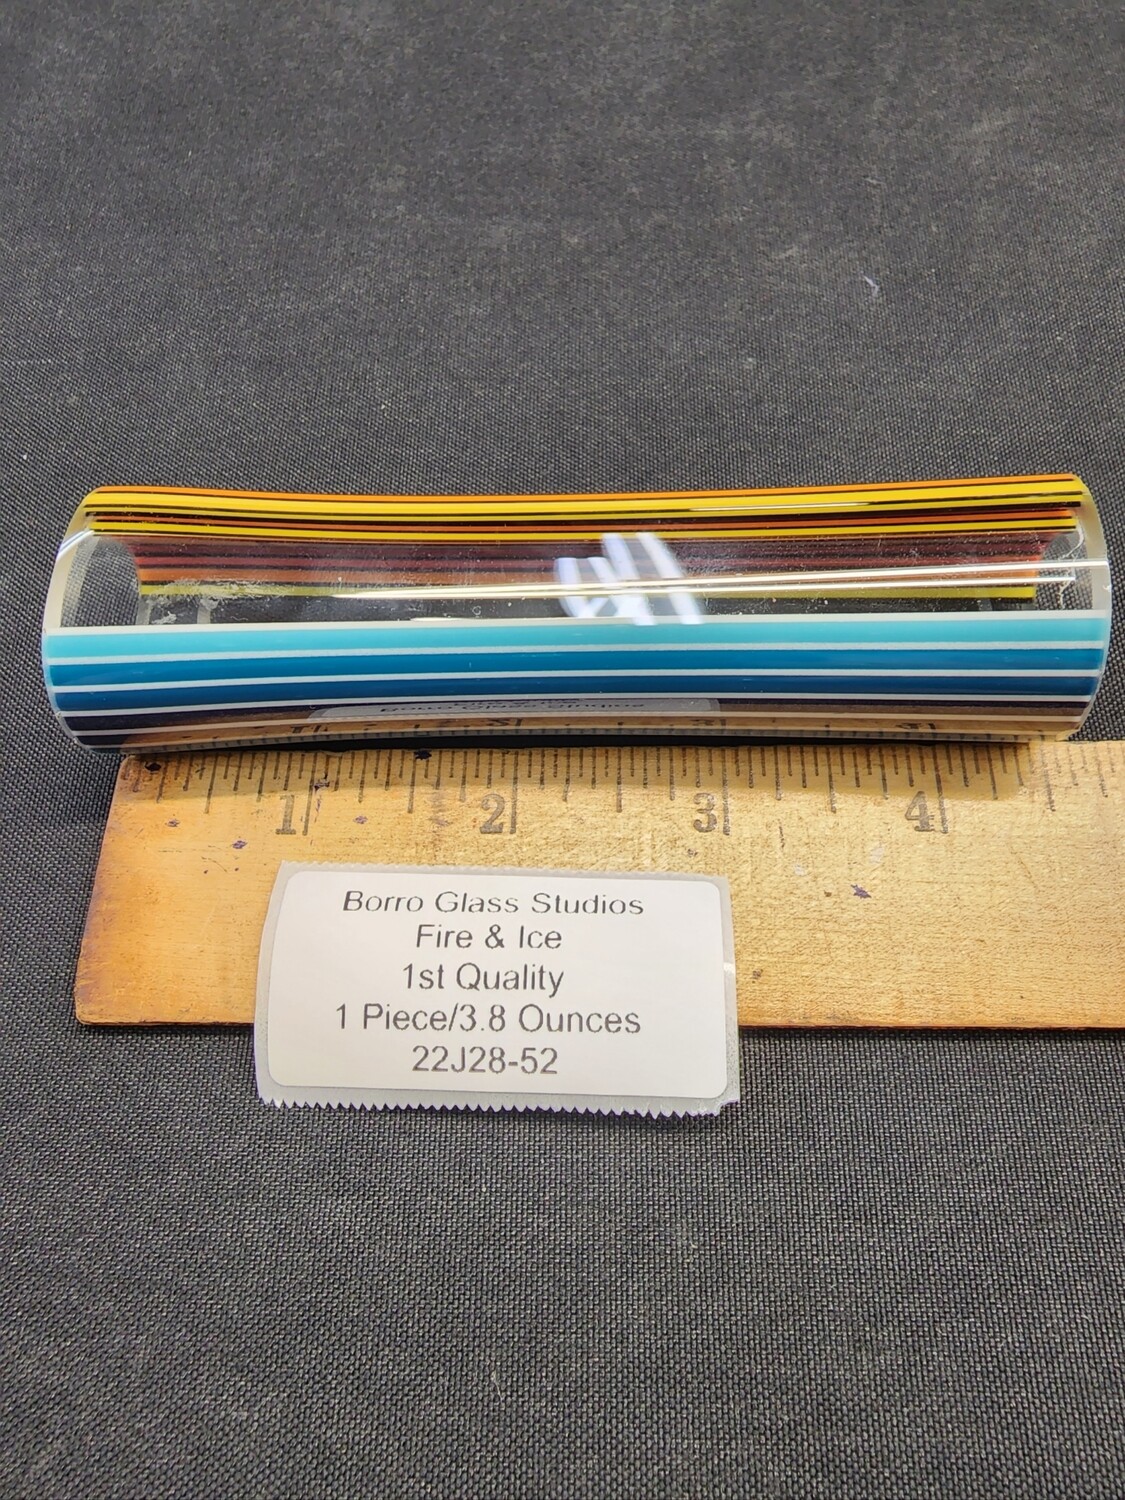 Fire & Ice Boro Vac Stacked Line Tubing - 1st Quality - 3.8 Ounces